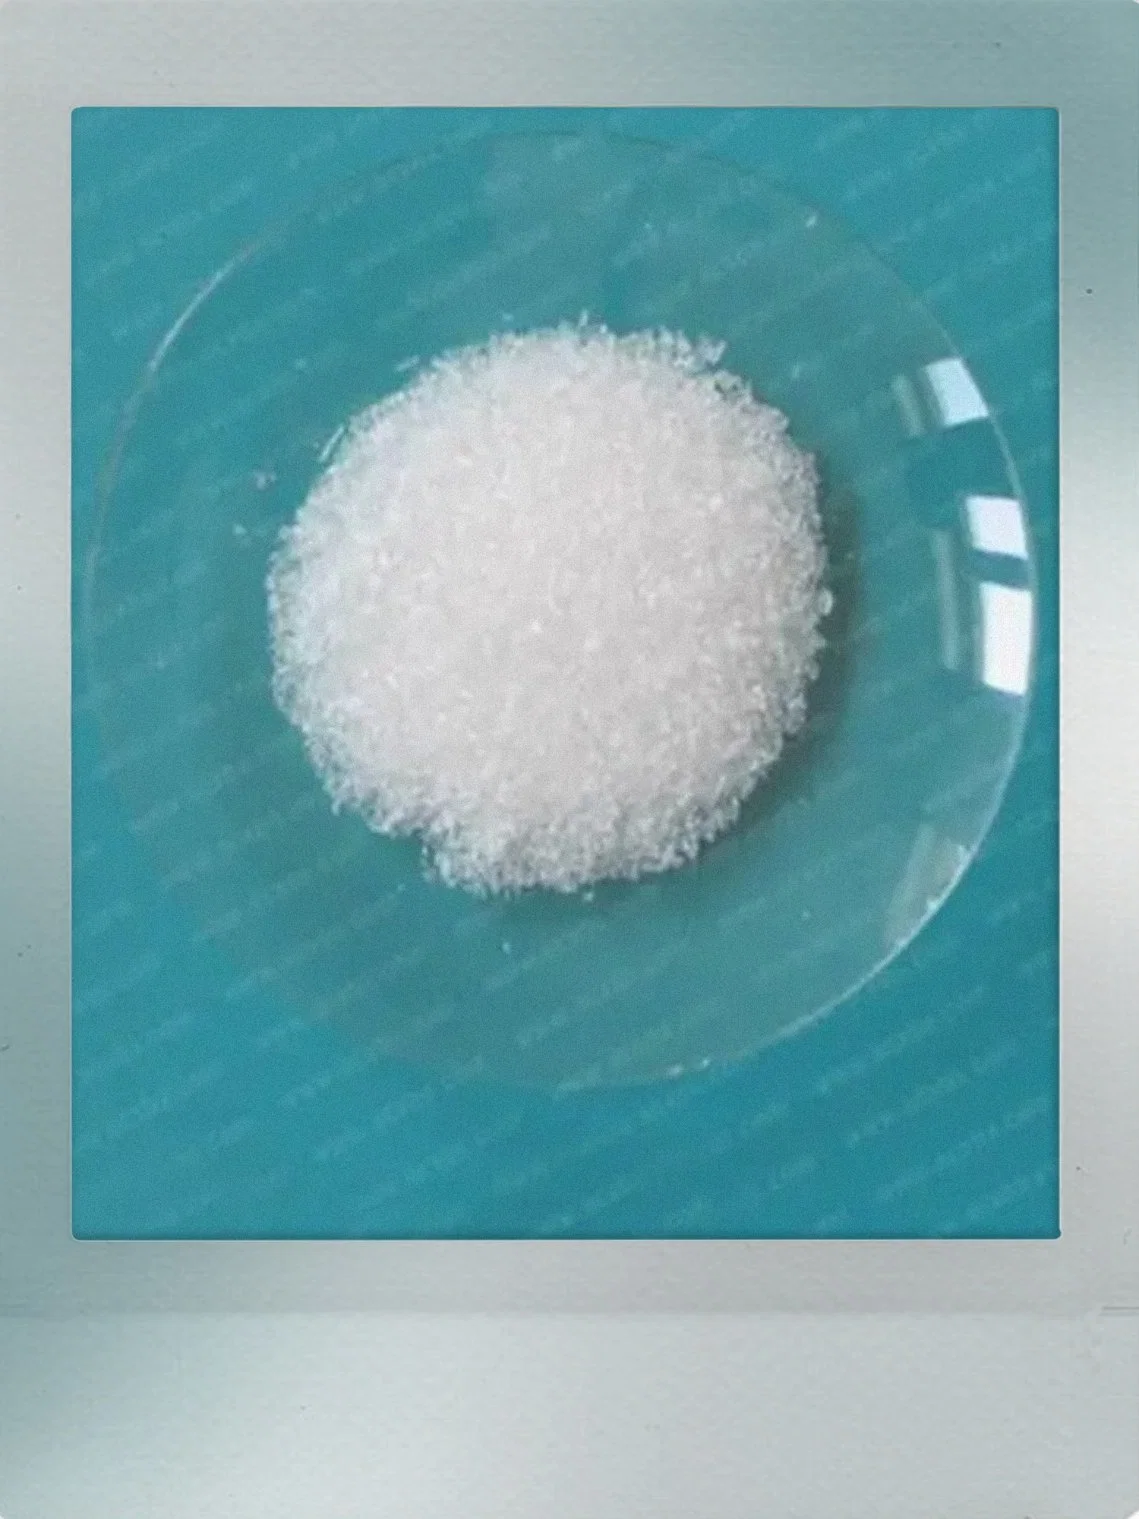 Trisodium Phosphate Applied as Cleaning Agent in Electroplating